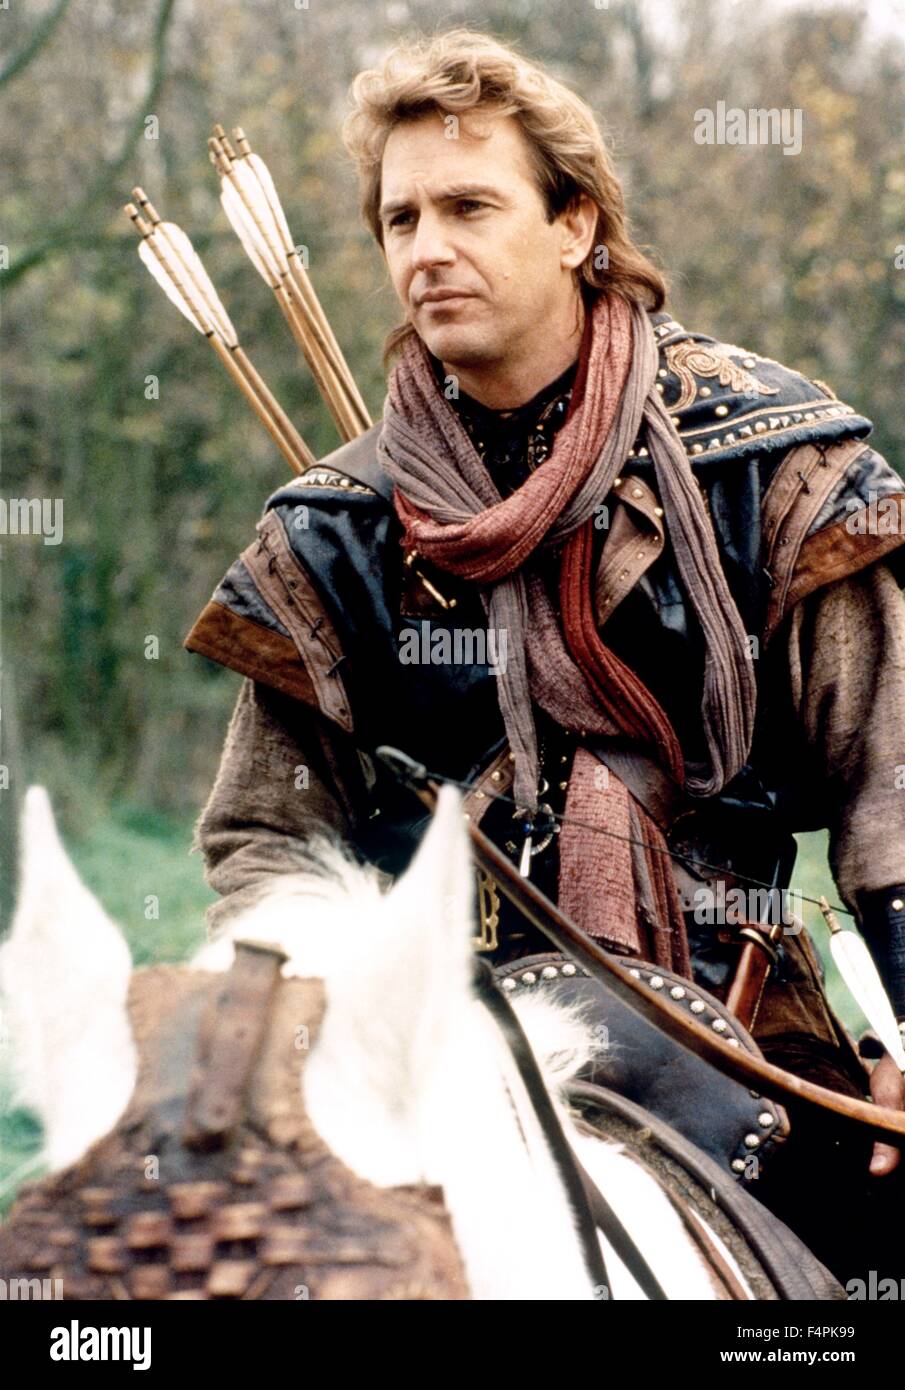 Kevin Costner / Robin Hood : Prince of Thieves / 1991 directed by Kevin  Reynolds [Warner Bros. Pictures / Morgan C] Stock Photo - Alamy